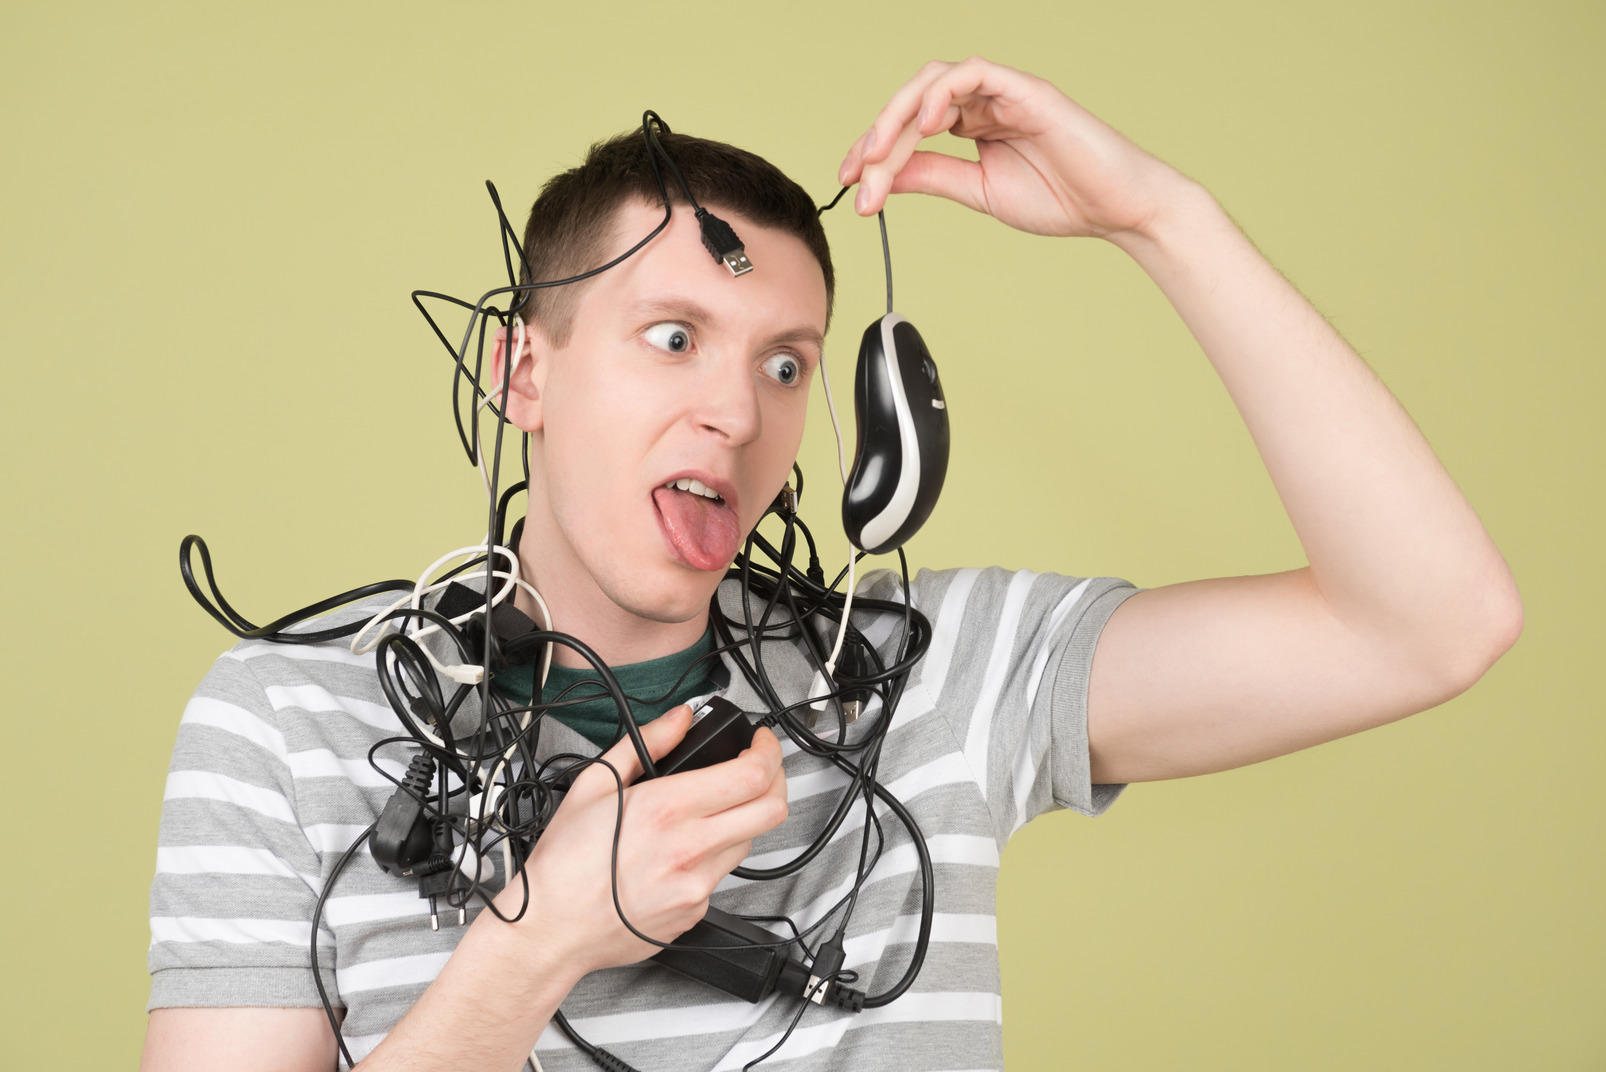 Young man tangled in wires